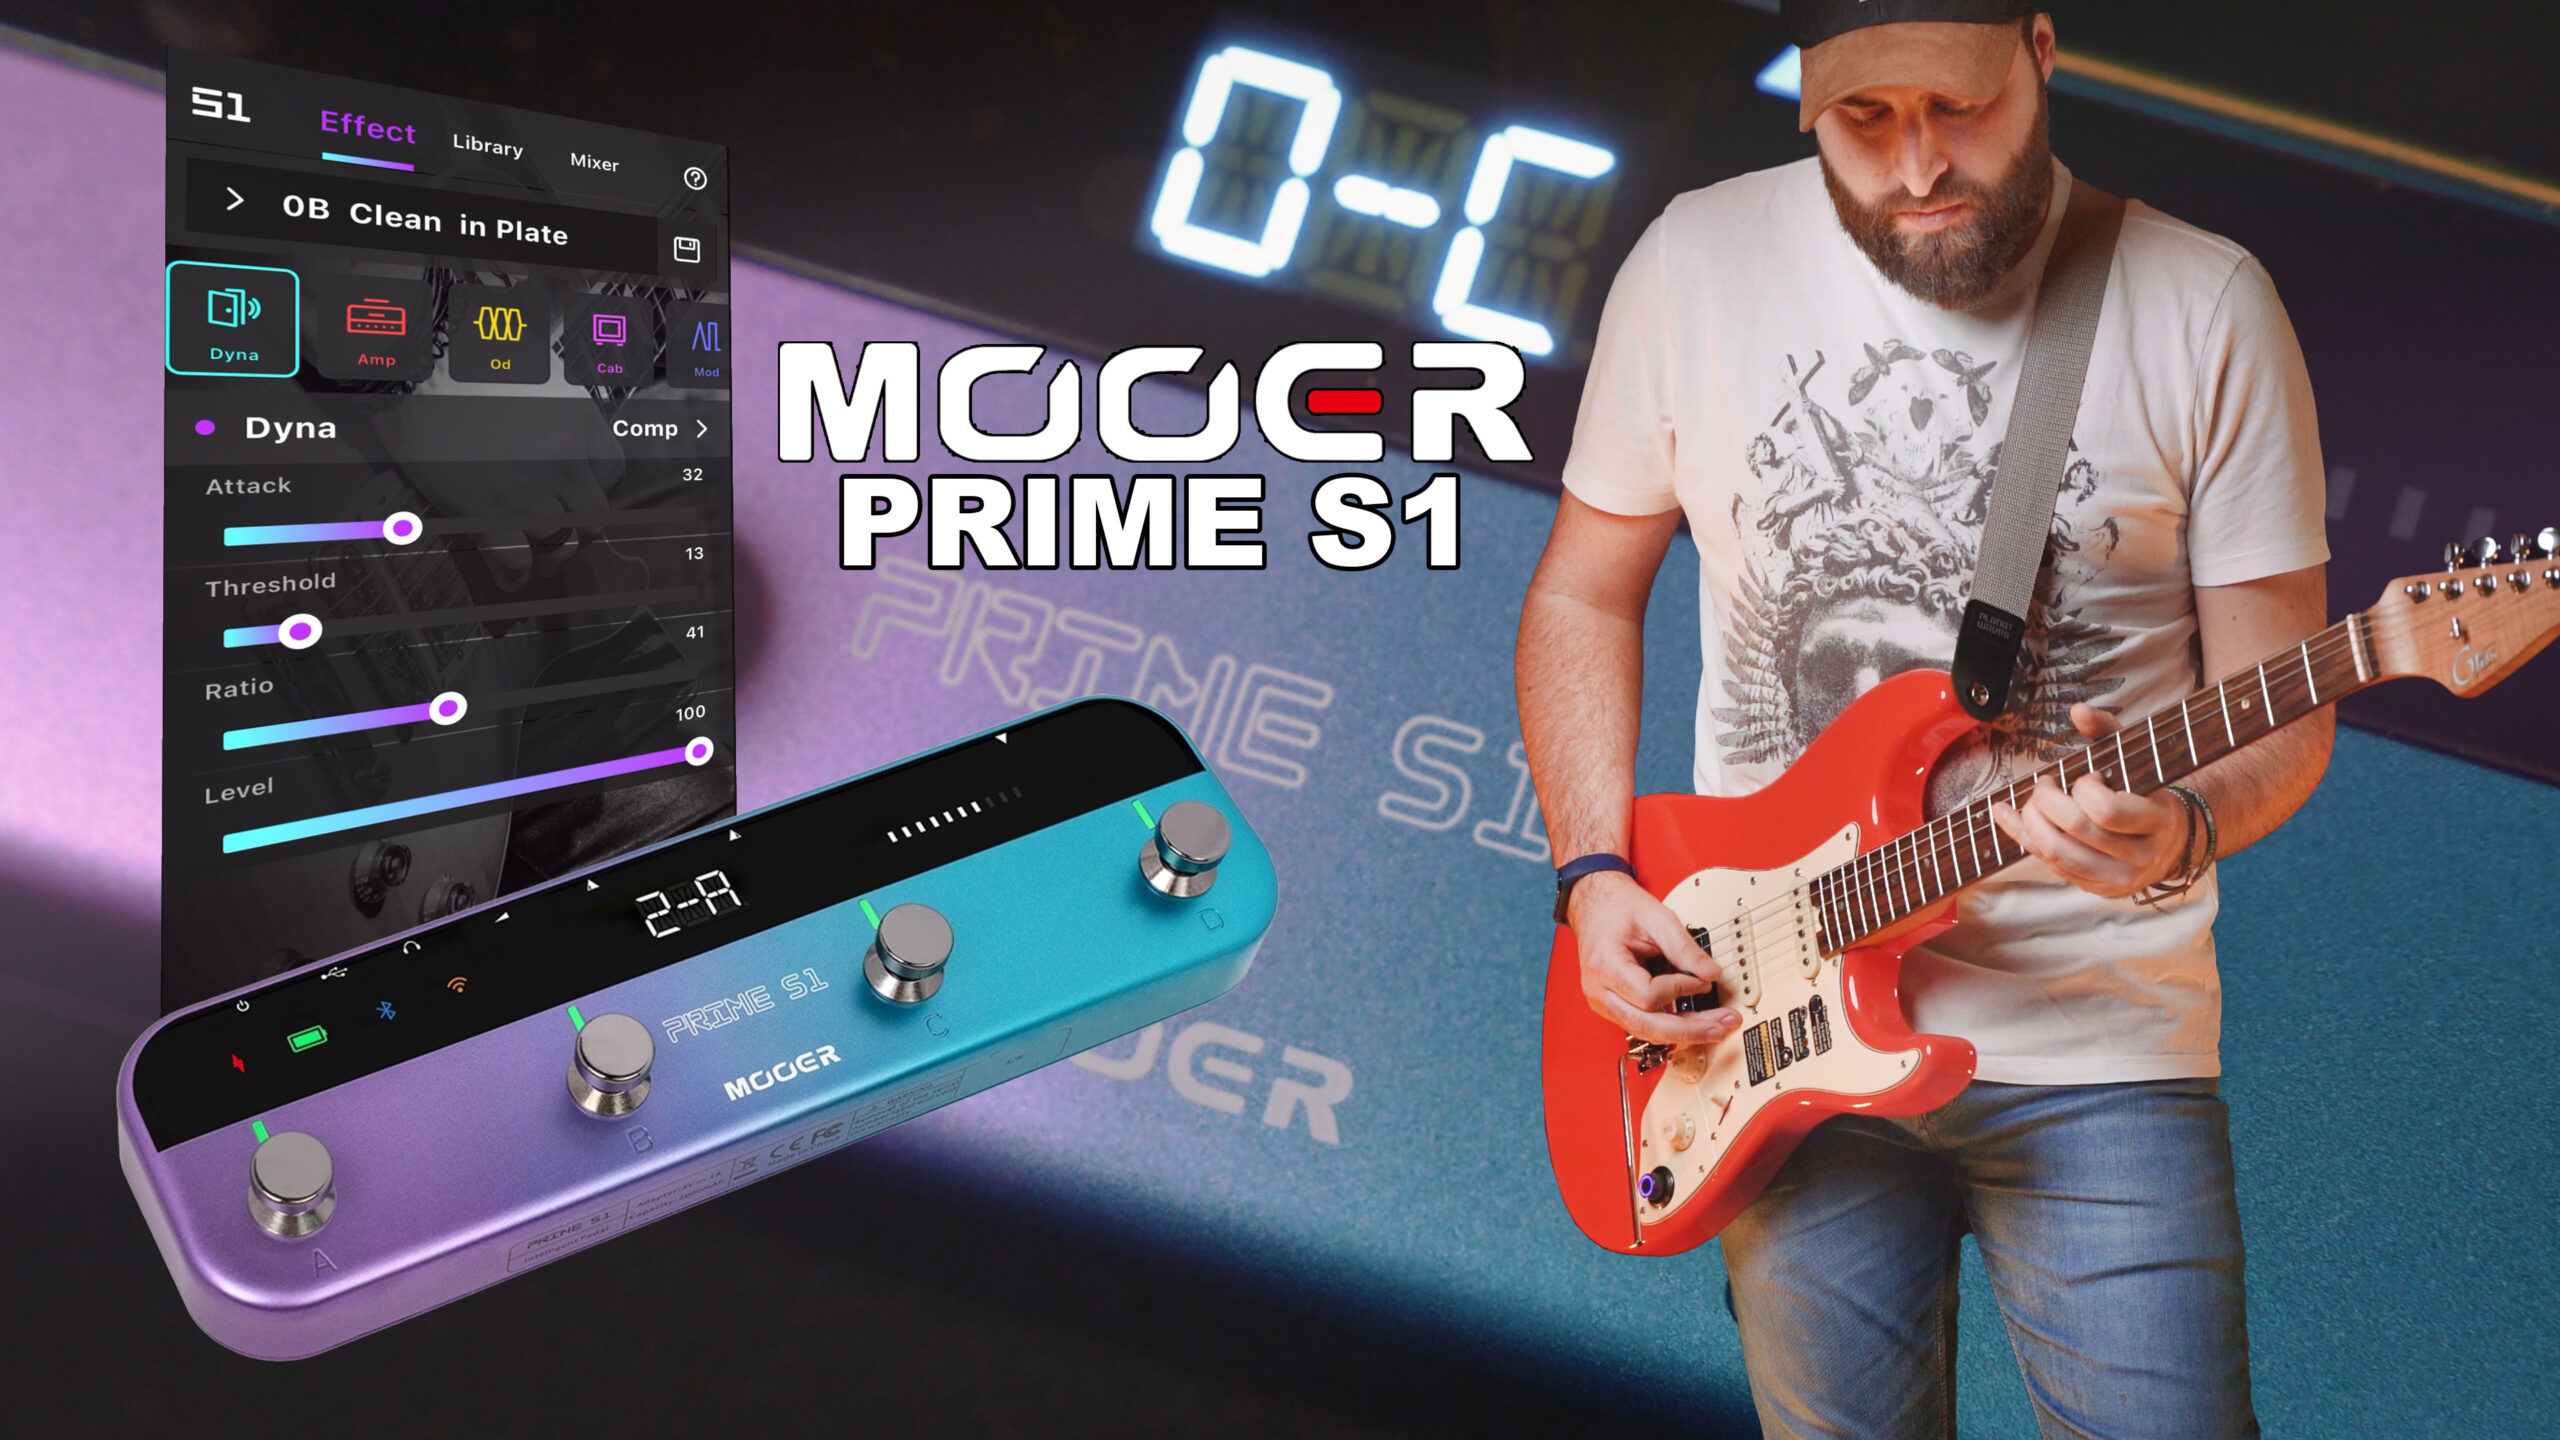 Mooer Prime S1 scaled